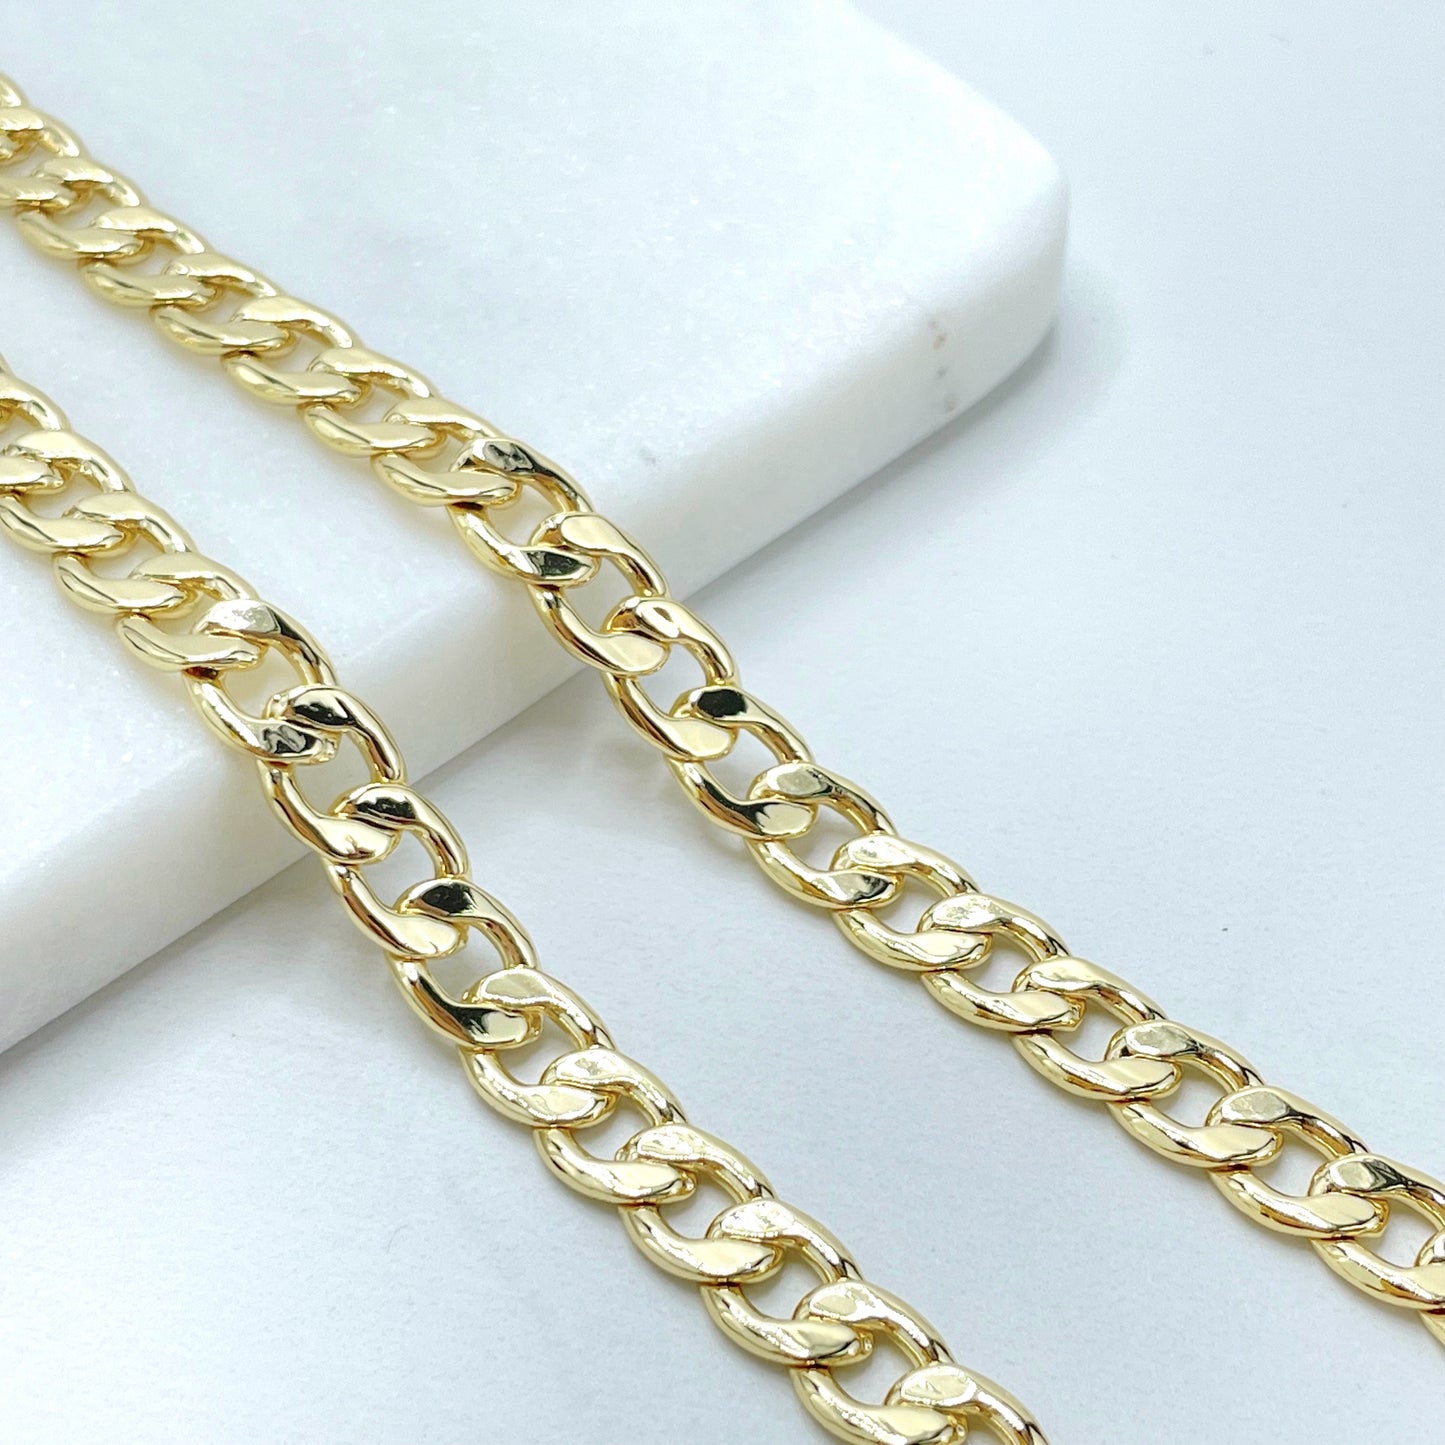 18k Gold Filled Miami Cuban Link Chain 6mm Thickness, 18 or 32 inches of length, Unisex Curb Link Chain, Wholesale Jewelry Making Supplies